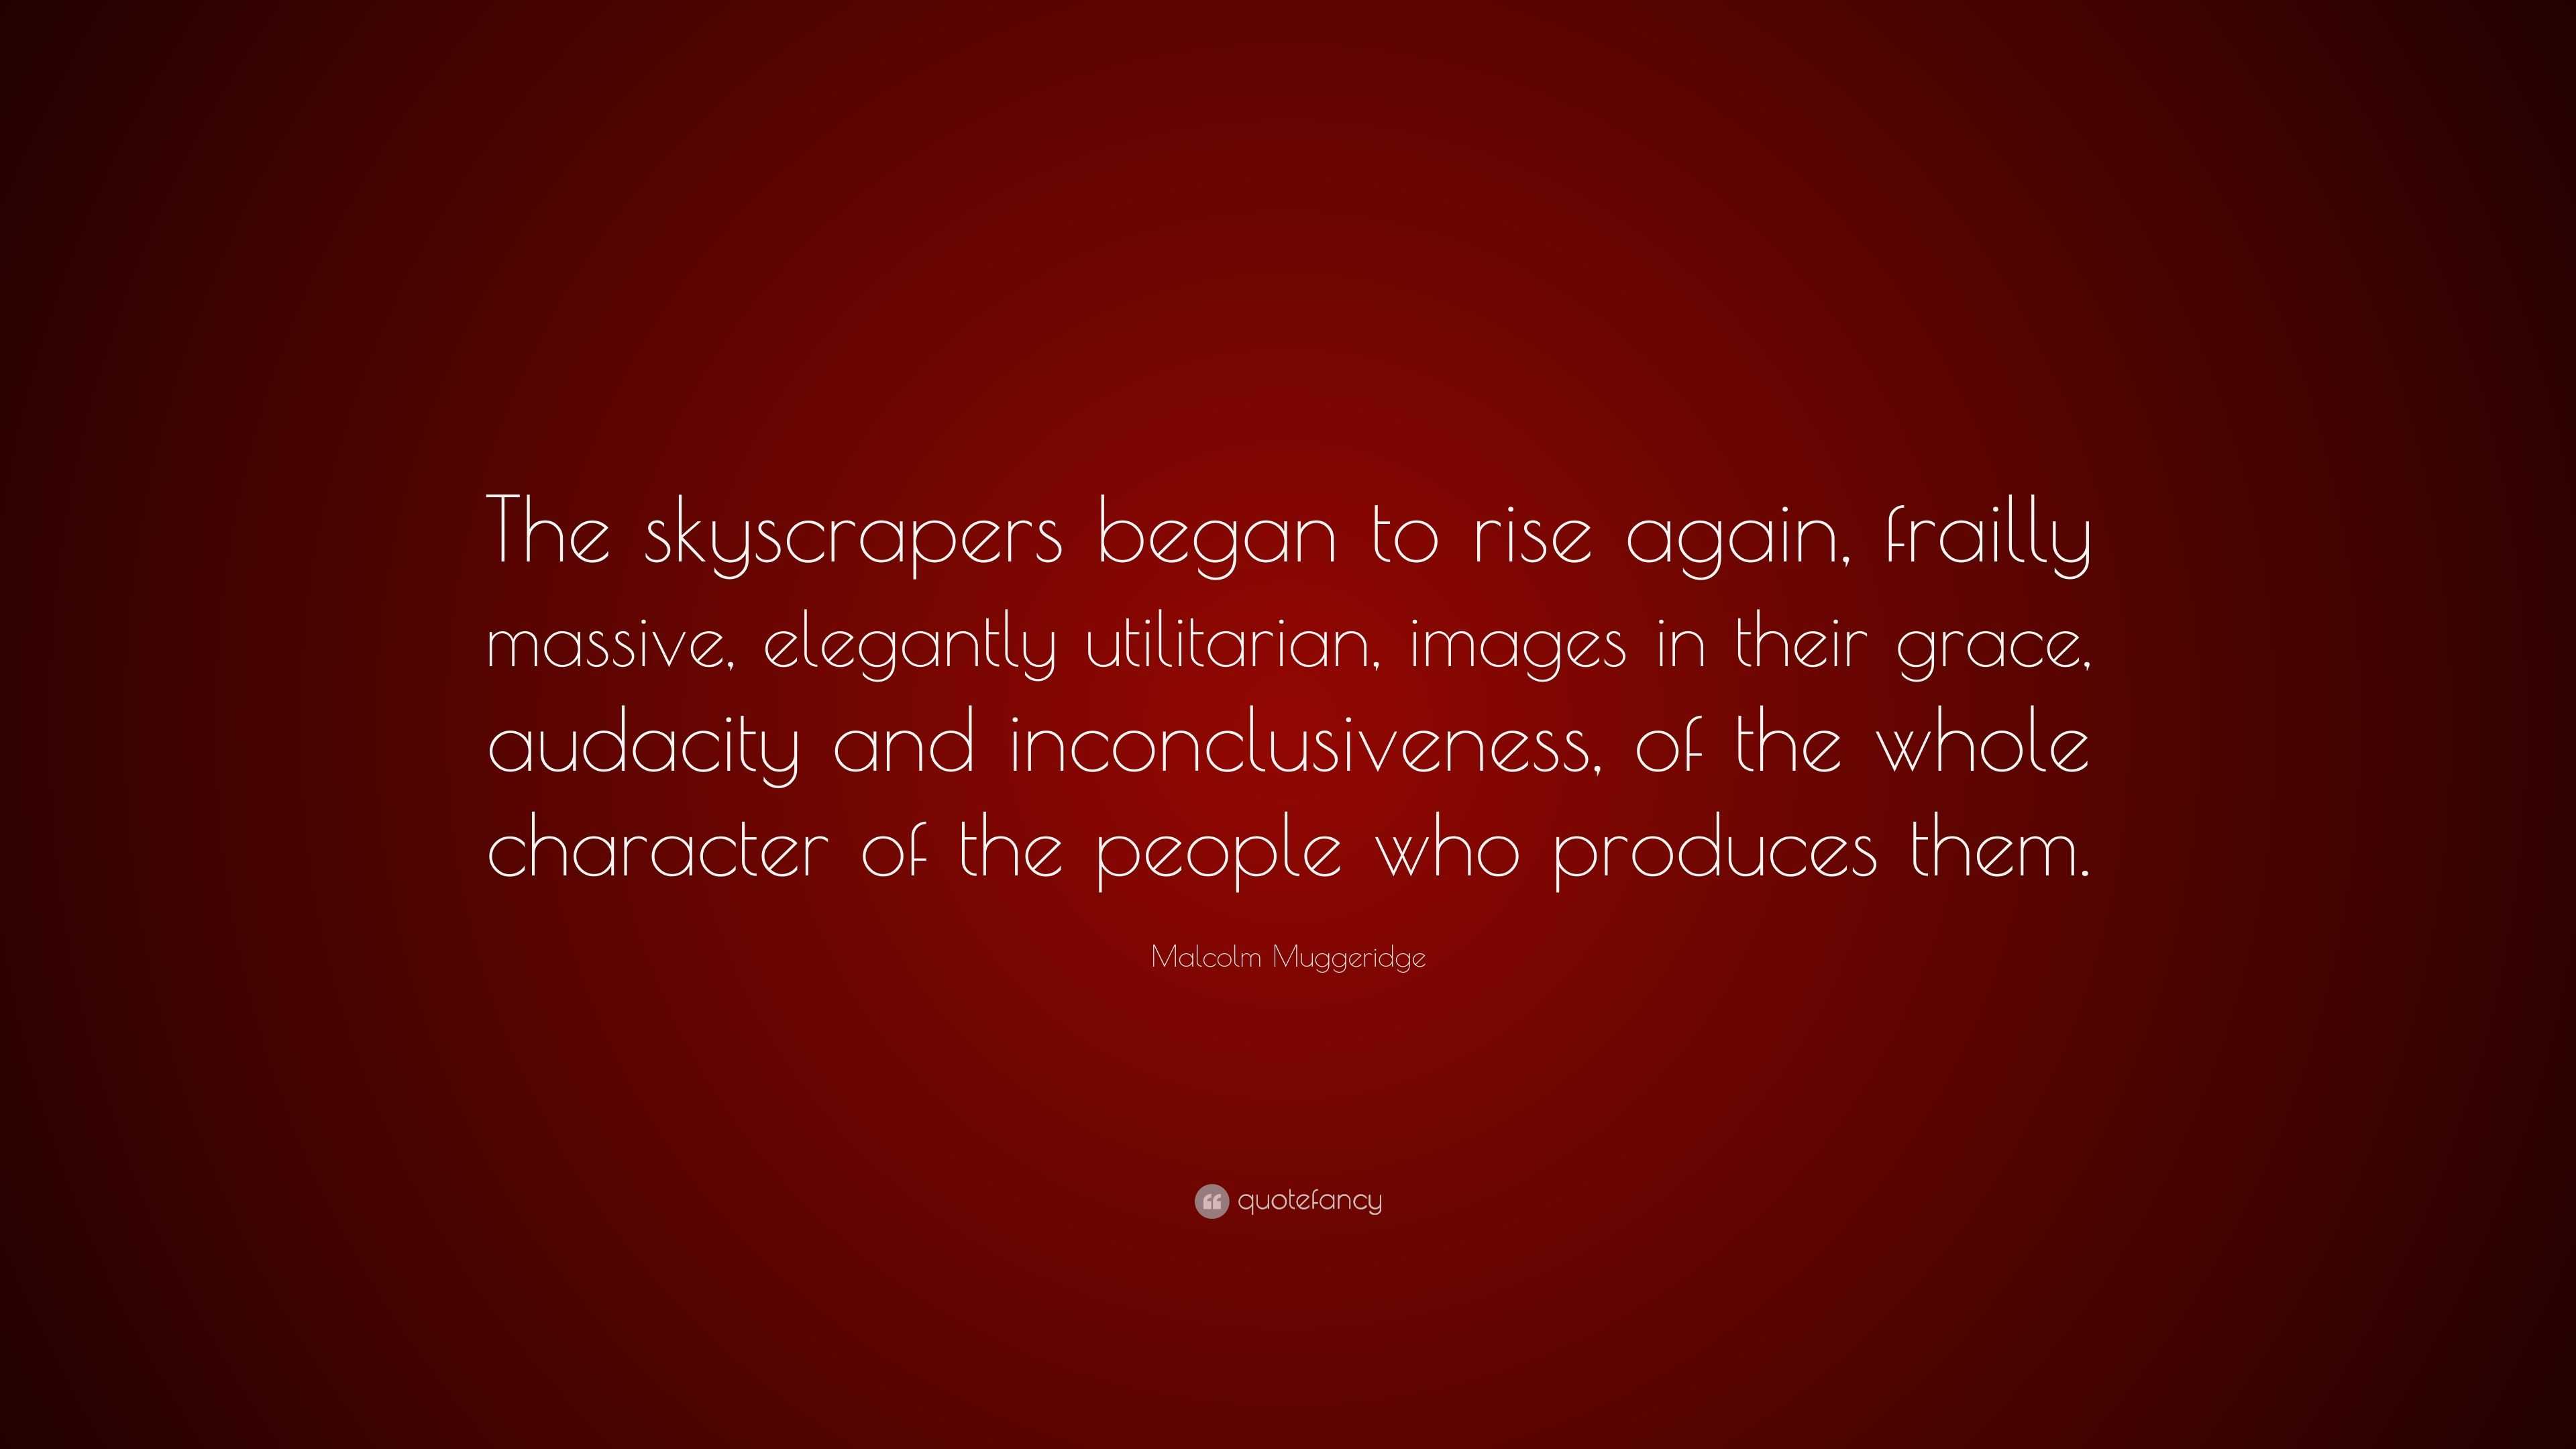 Malcolm Muggeridge Quote: “The skyscrapers began to rise again, frailly ...